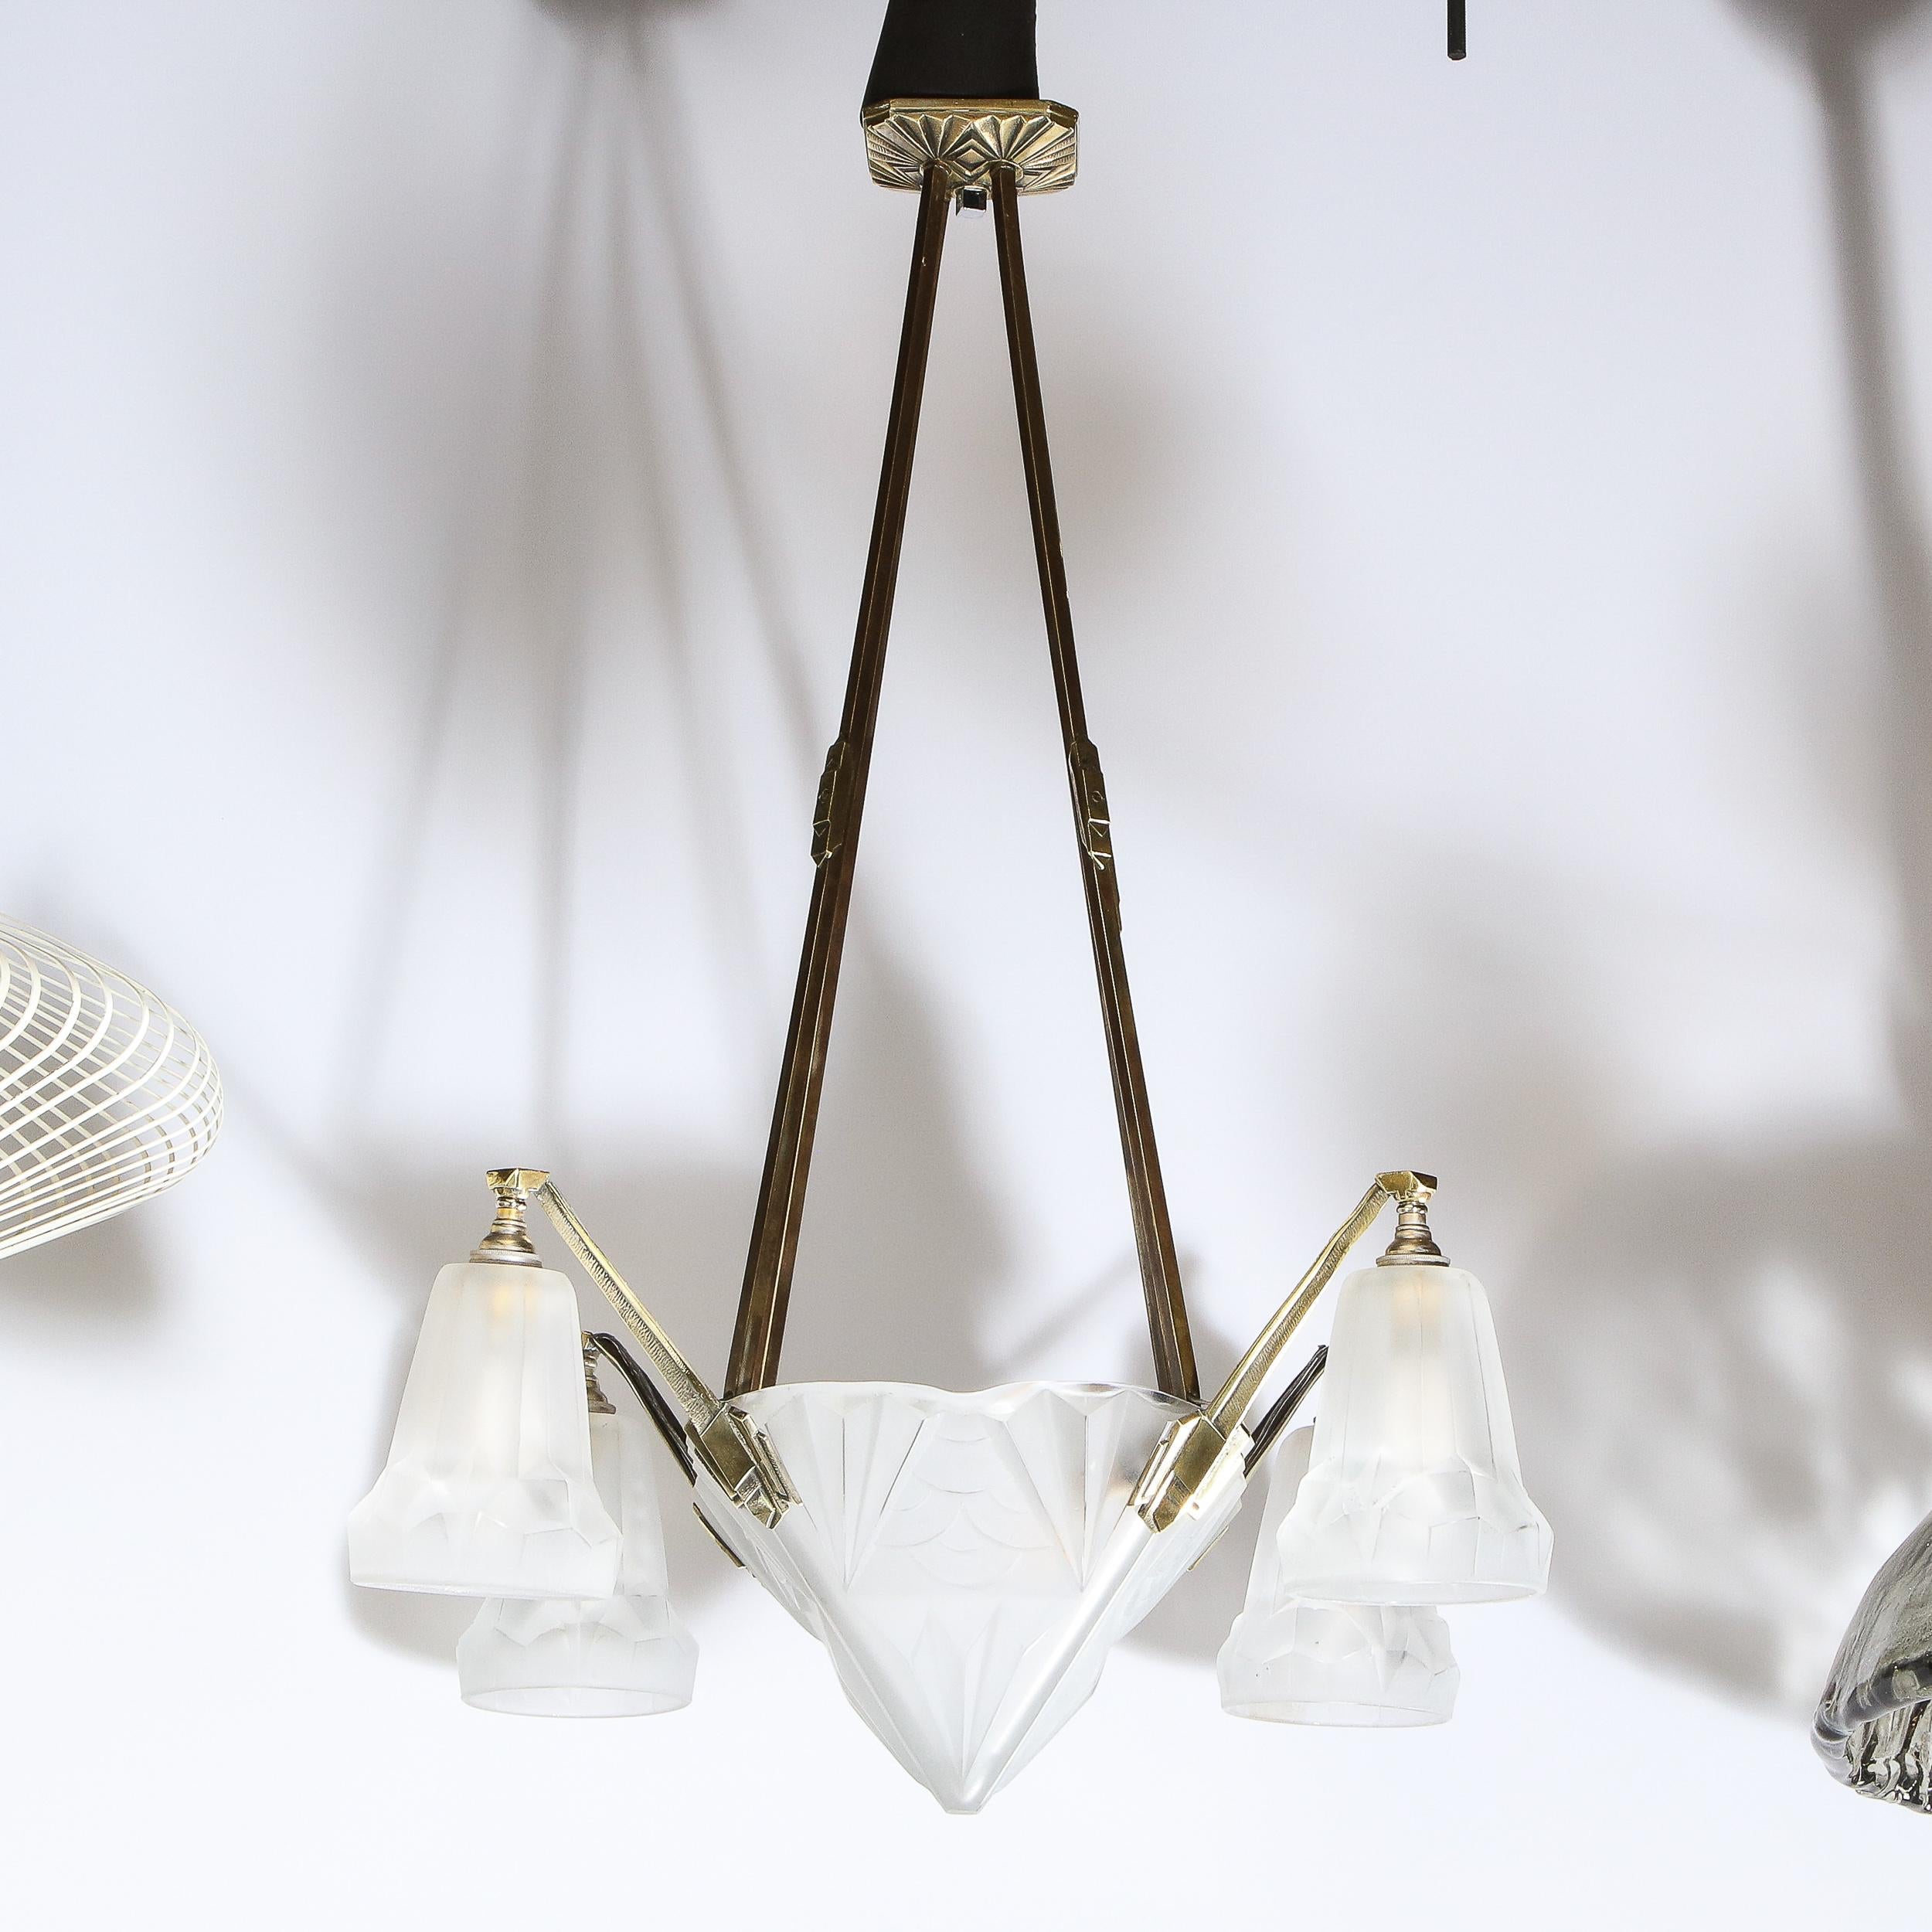 This elegant Art Deco chandelier was realized in France circa 1930. It offers a silvered bronze frame with a pyramidal body and four conical shades that descend from the cantilevered arms. The frosted glass of the body and shades is etched in bas